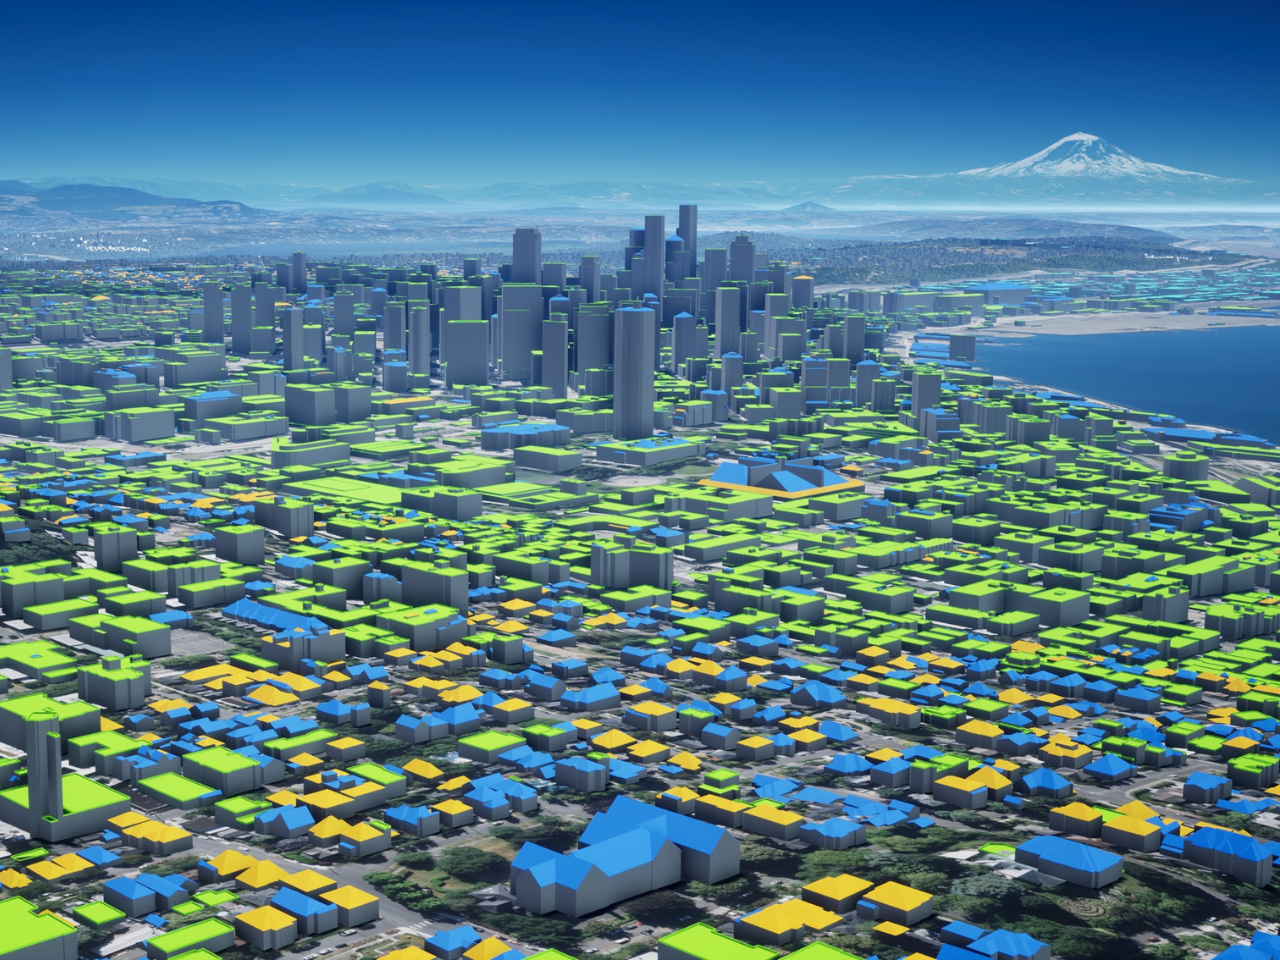 Building volumes extracted from blackshark.ai’s GEOINT capabilities for Seattle, Washington, USA